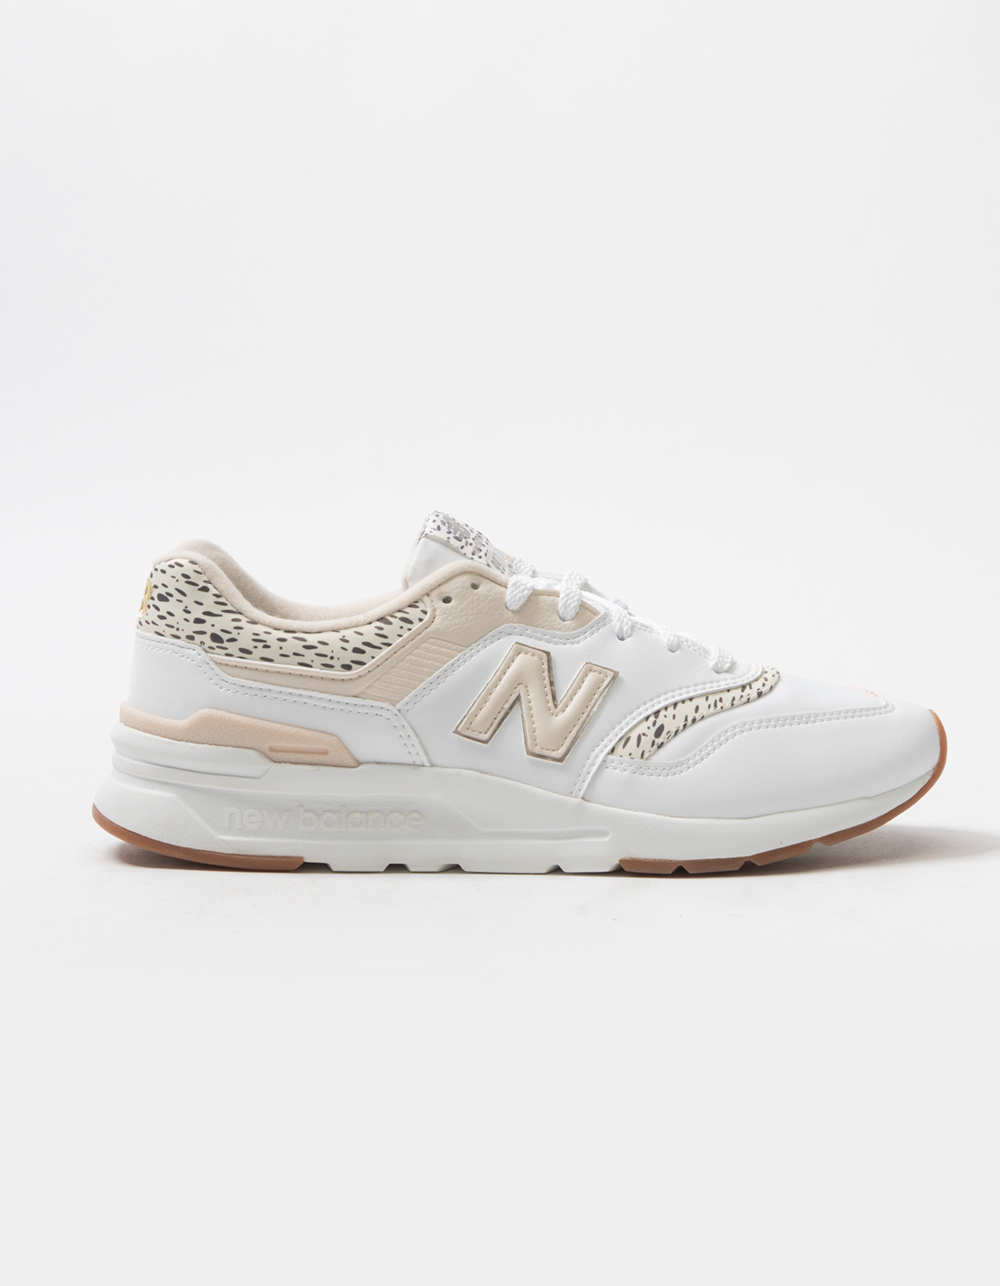 NEW BALANCE 997 Womens Shoes - WHITE COMBO | Tillys